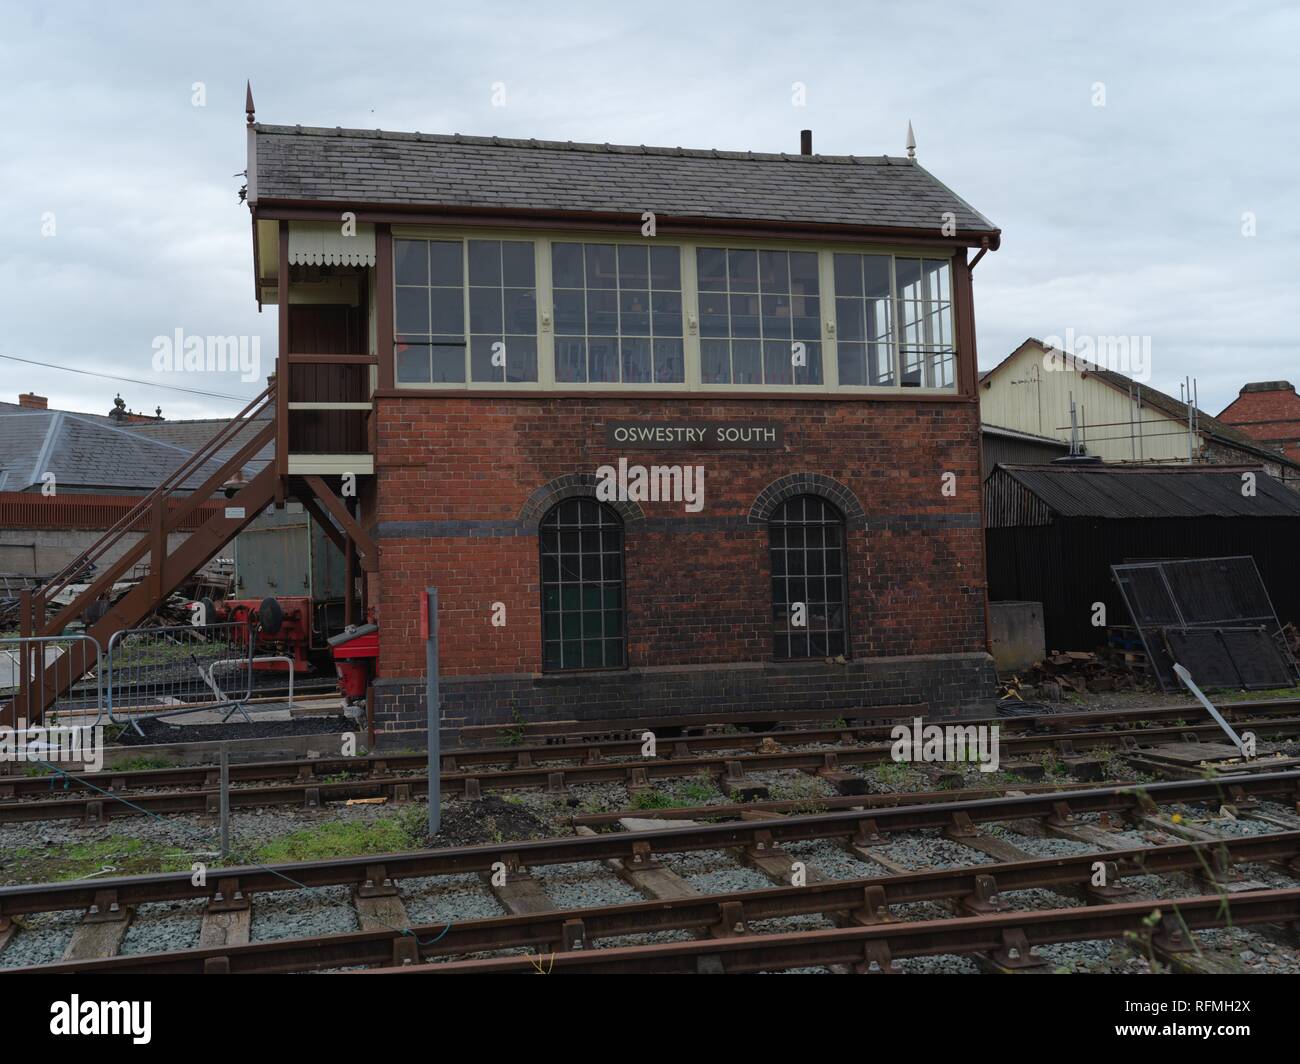 A old signal box with Oswestry South sign Stock Photo